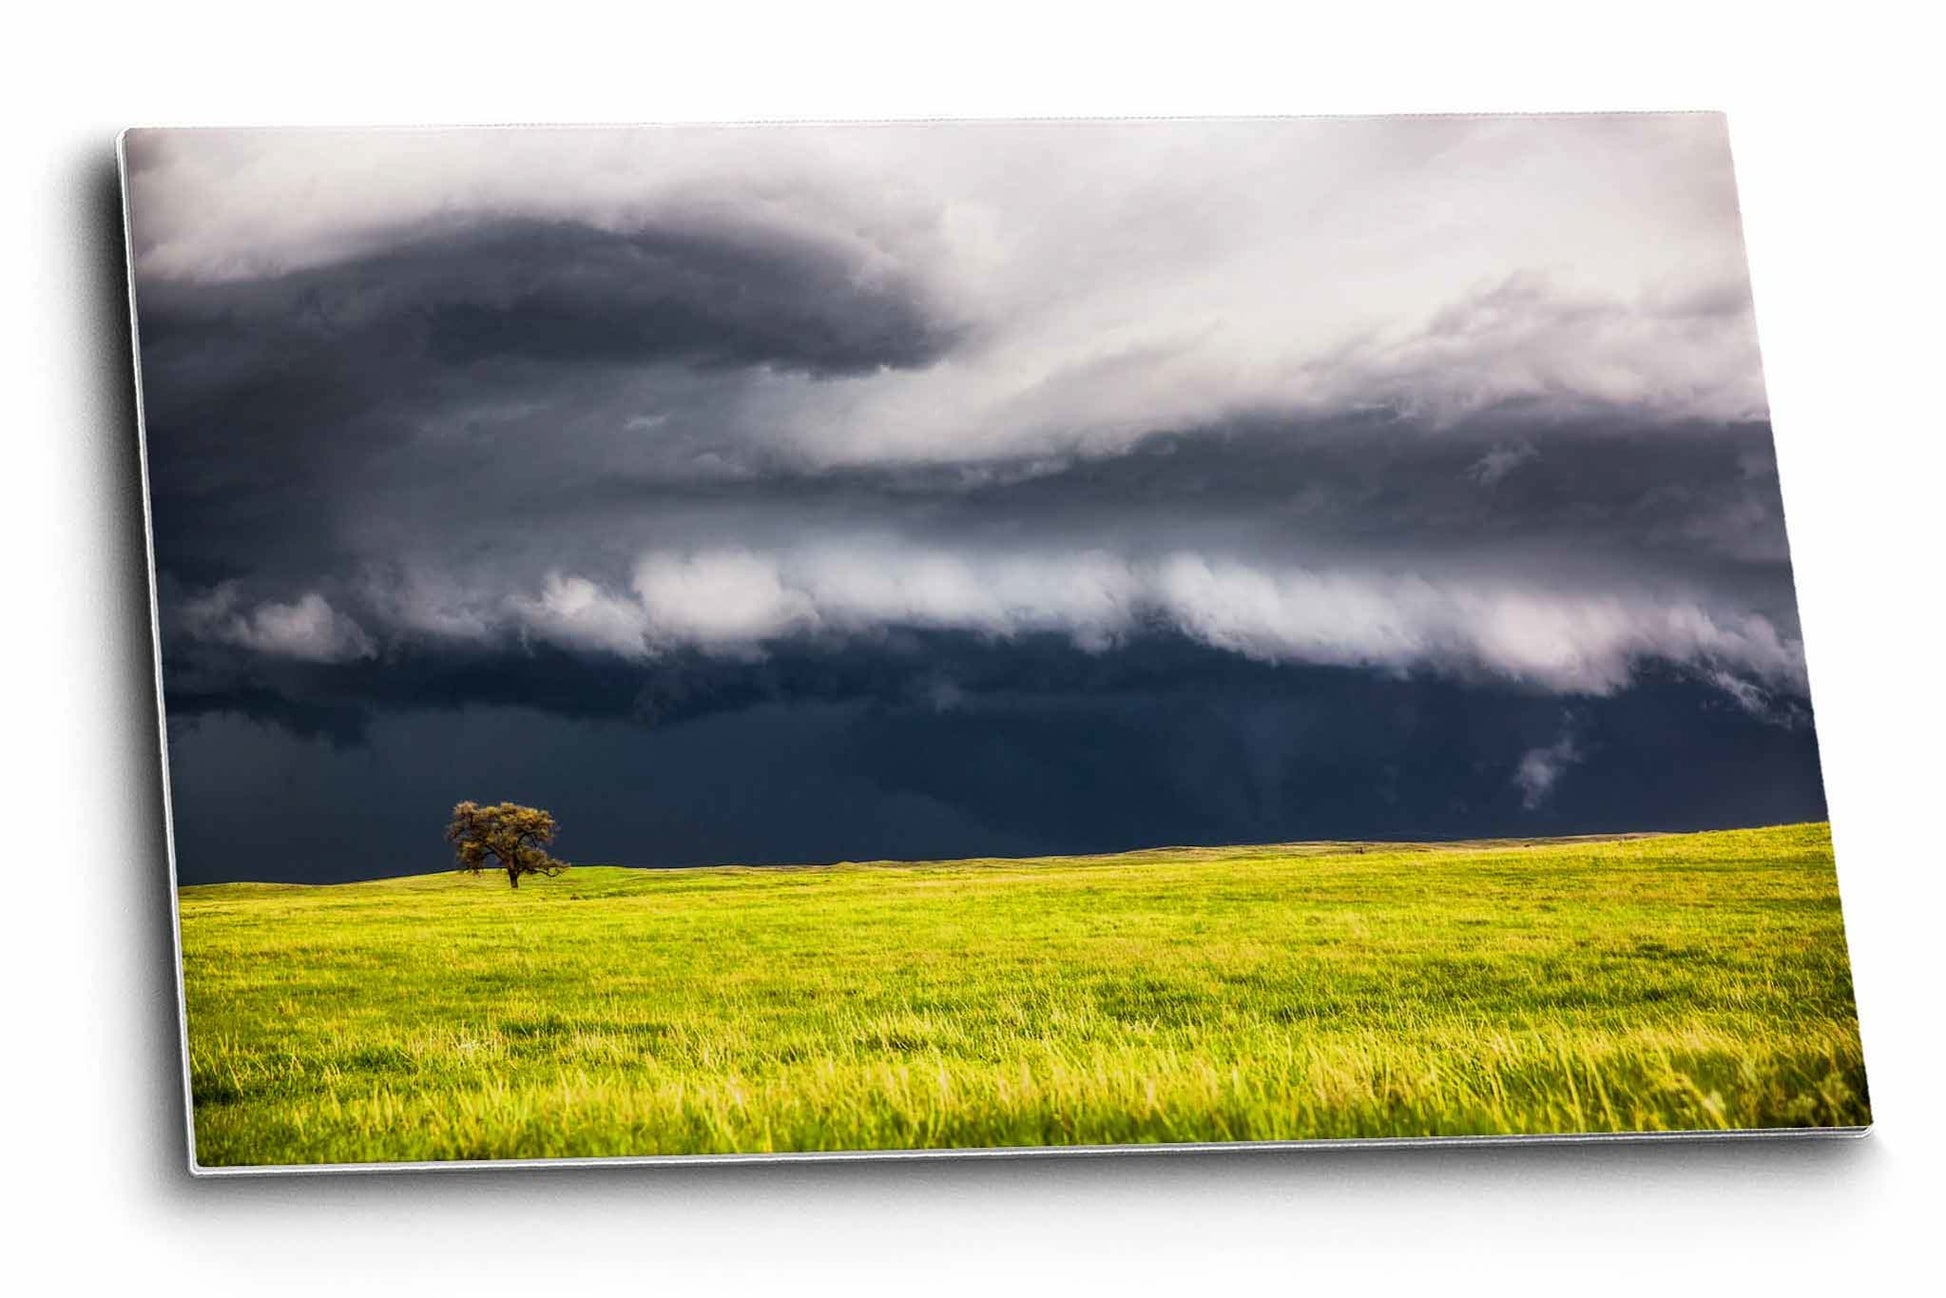 Storm metal print of an intense thunderstorm passing behind a lone tree on a stormy spring day in Nebraska by Sean Ramsey of Southern Plains Photography.